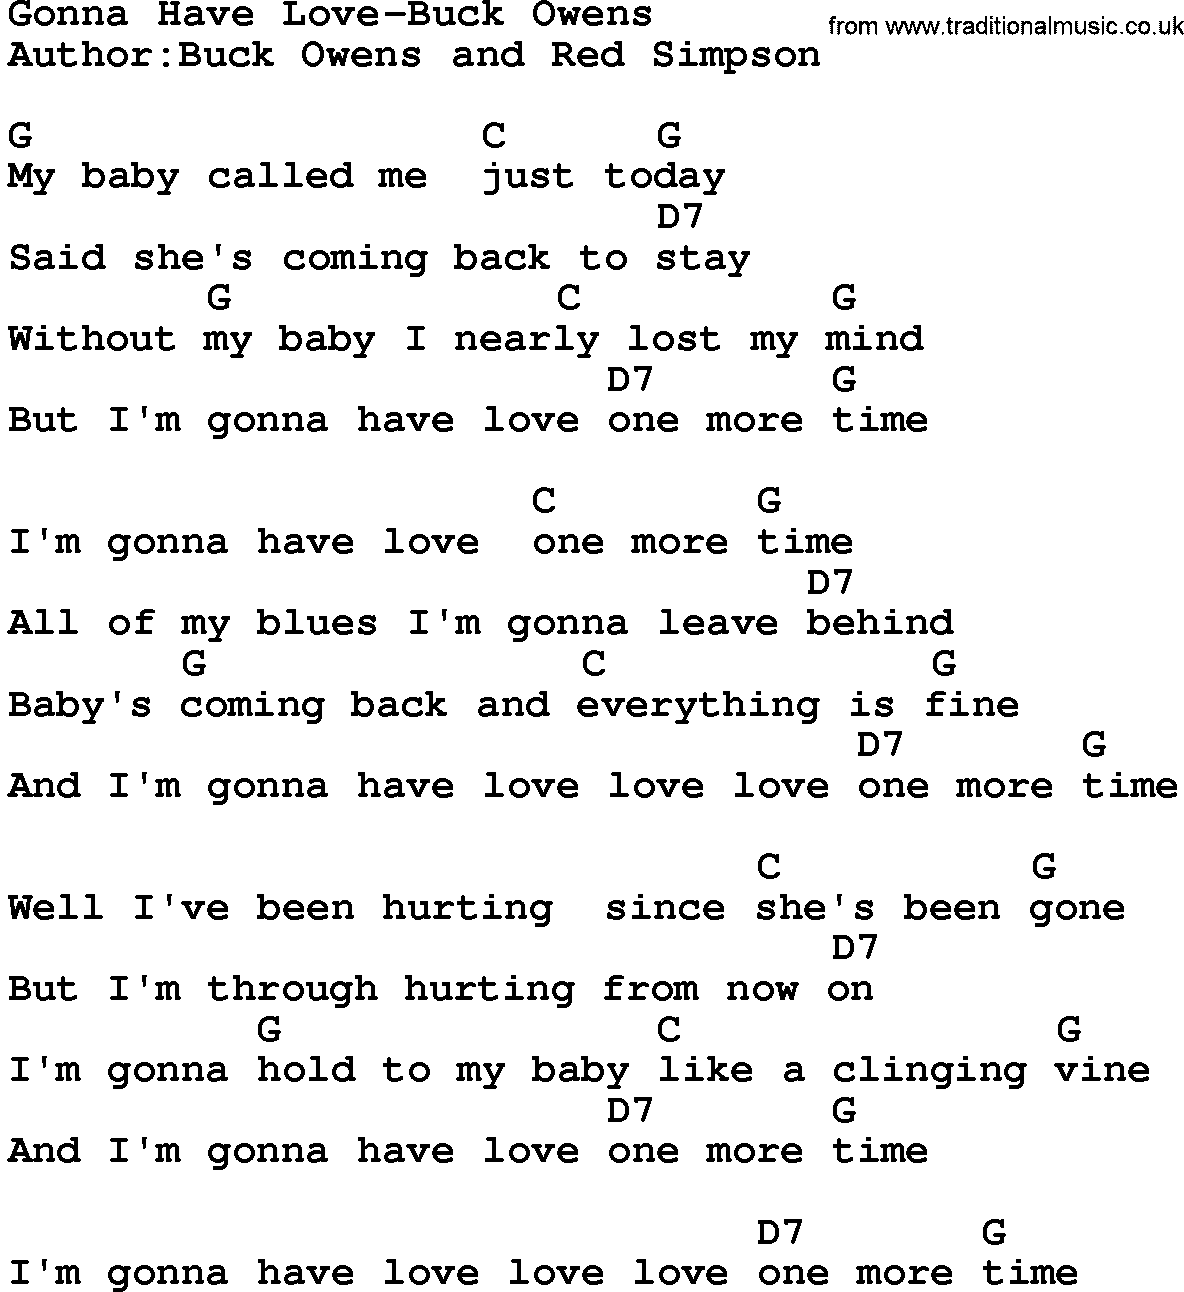 Country music song: Gonna Have Love-Buck Owens lyrics and chords